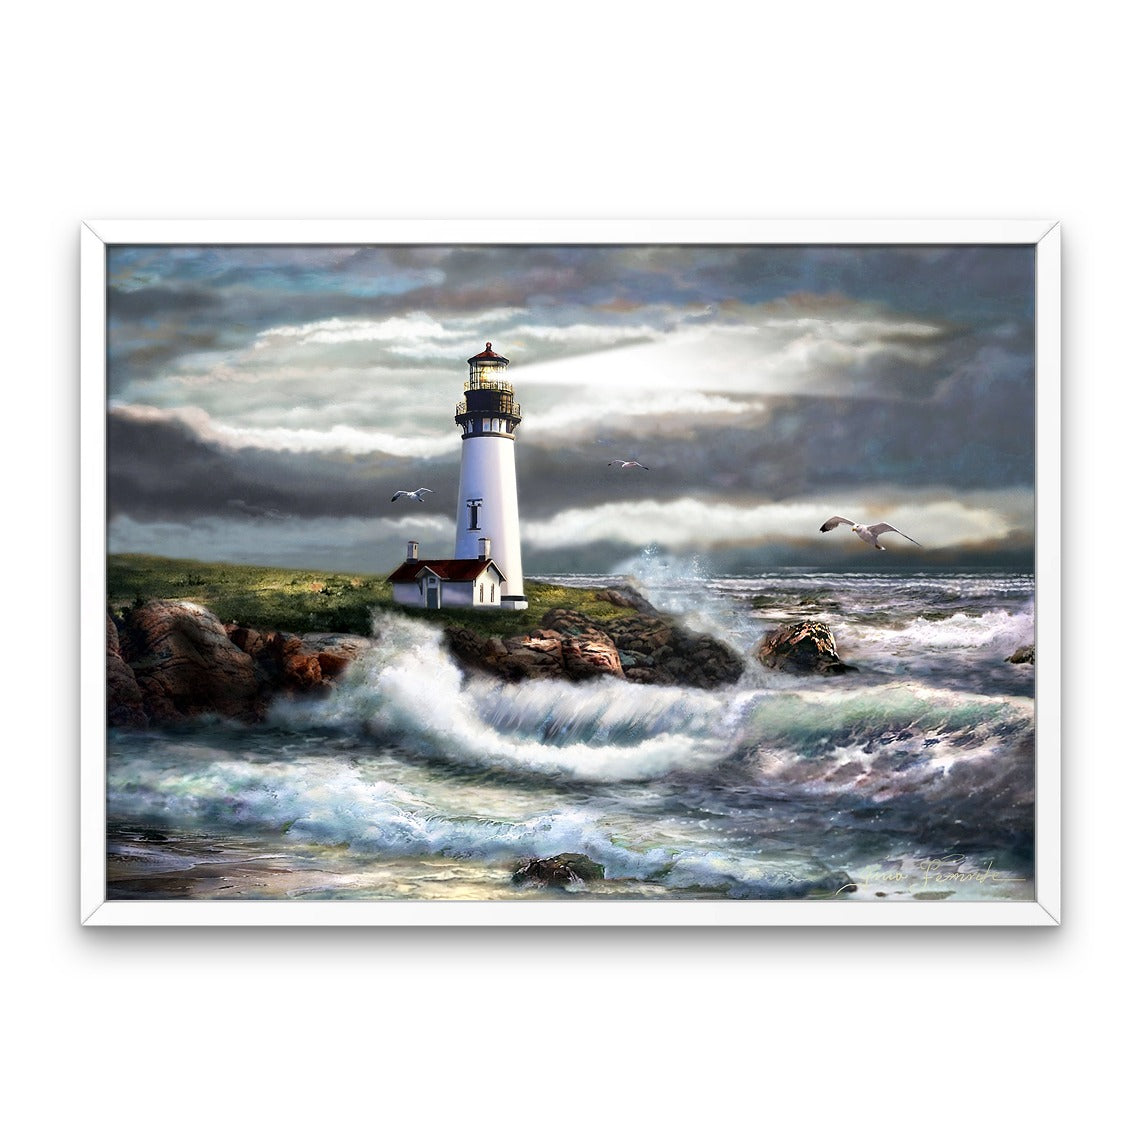 Lighthouse in the Waves - Diamond Painting Kit